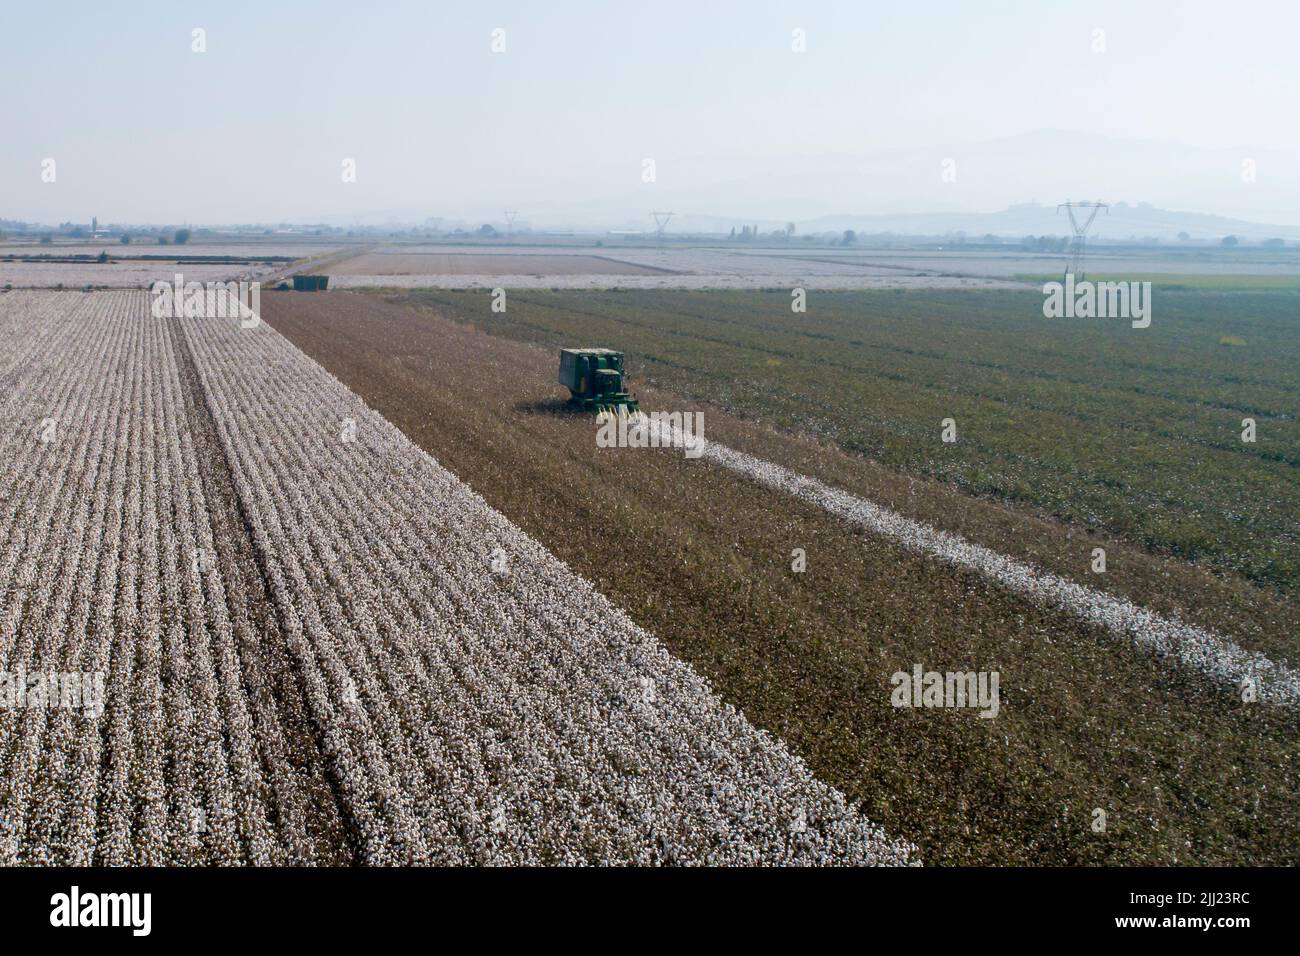 Aerial view of a large cotton field harvest Stock Photo